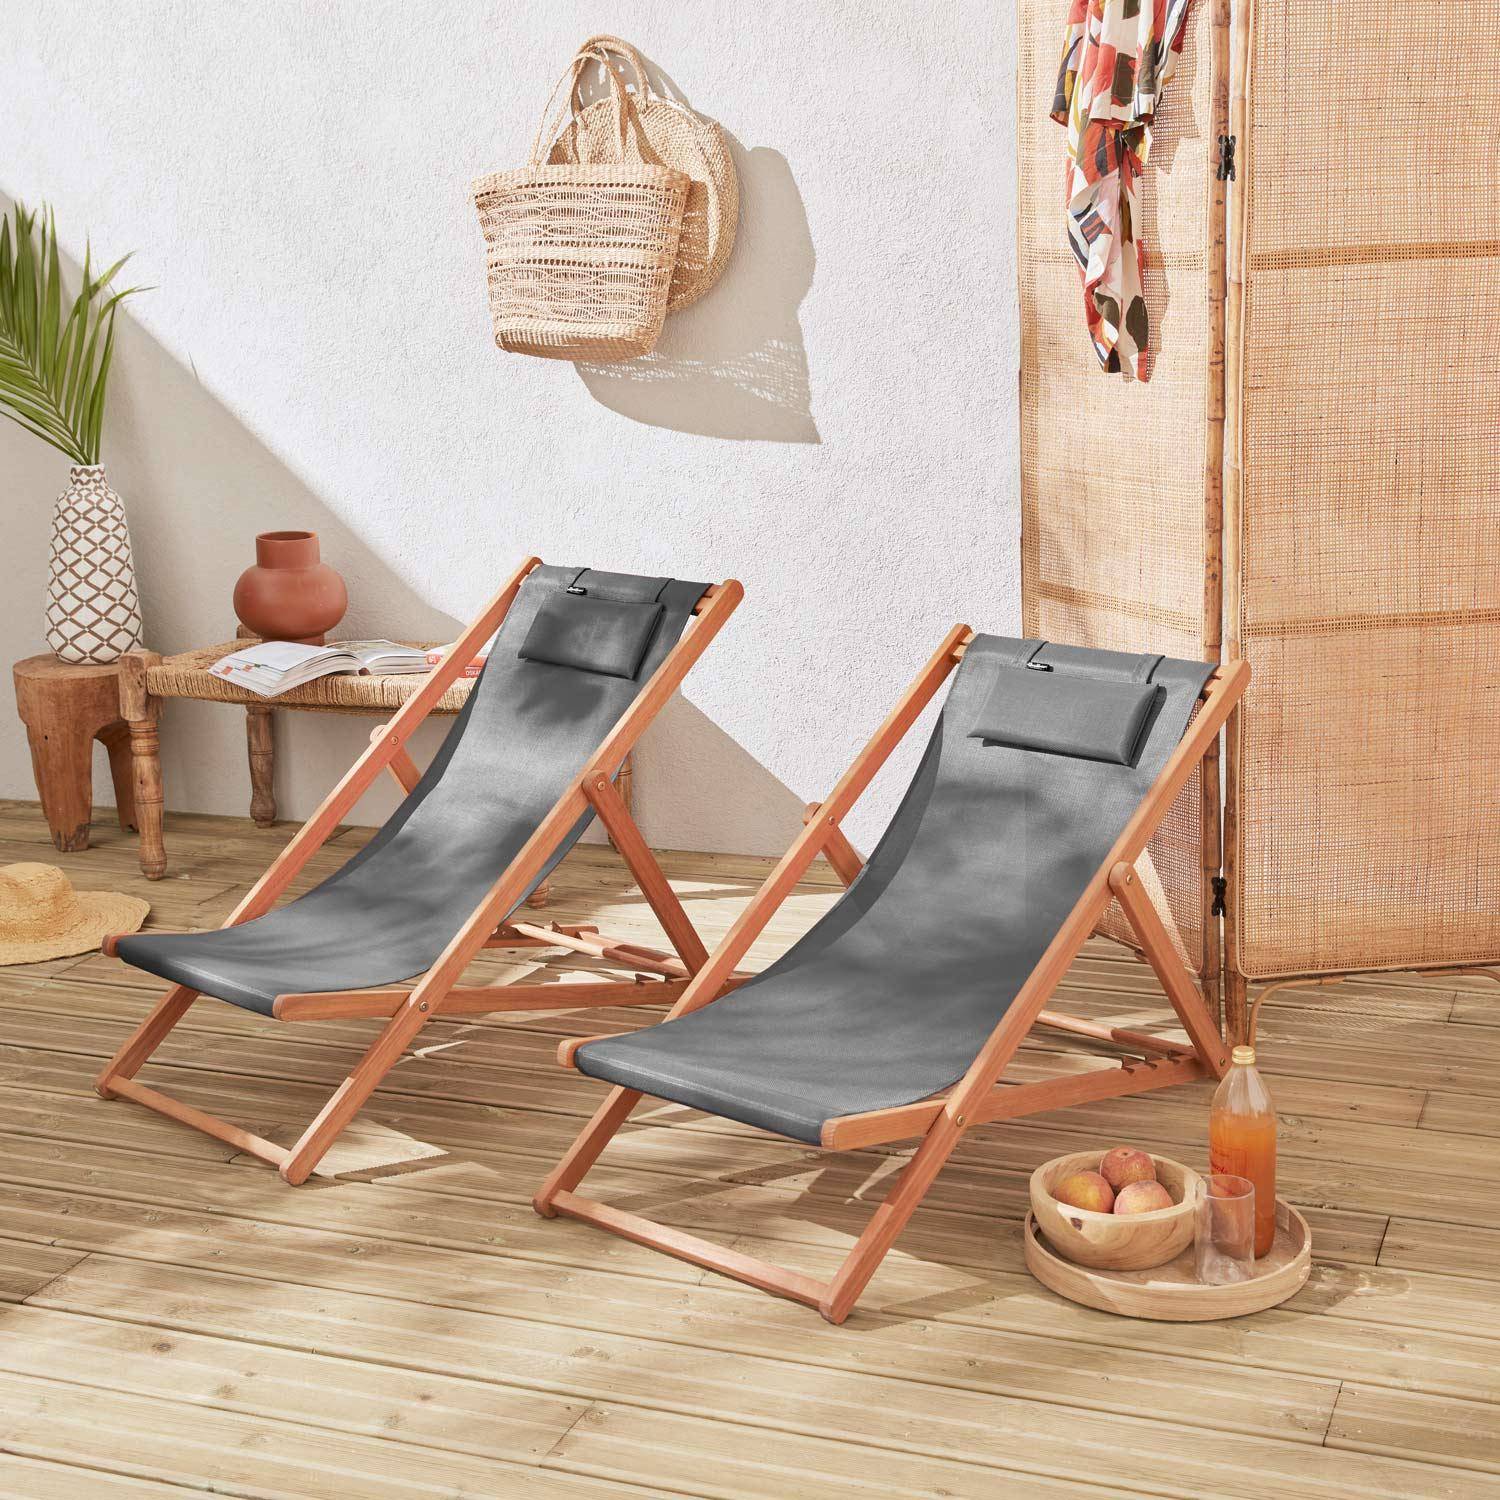 Pair of pre-oiled FSC eucalyptus deck chairs with headrest cushions - Creus - Wood/Anthracite,sweeek,Photo1